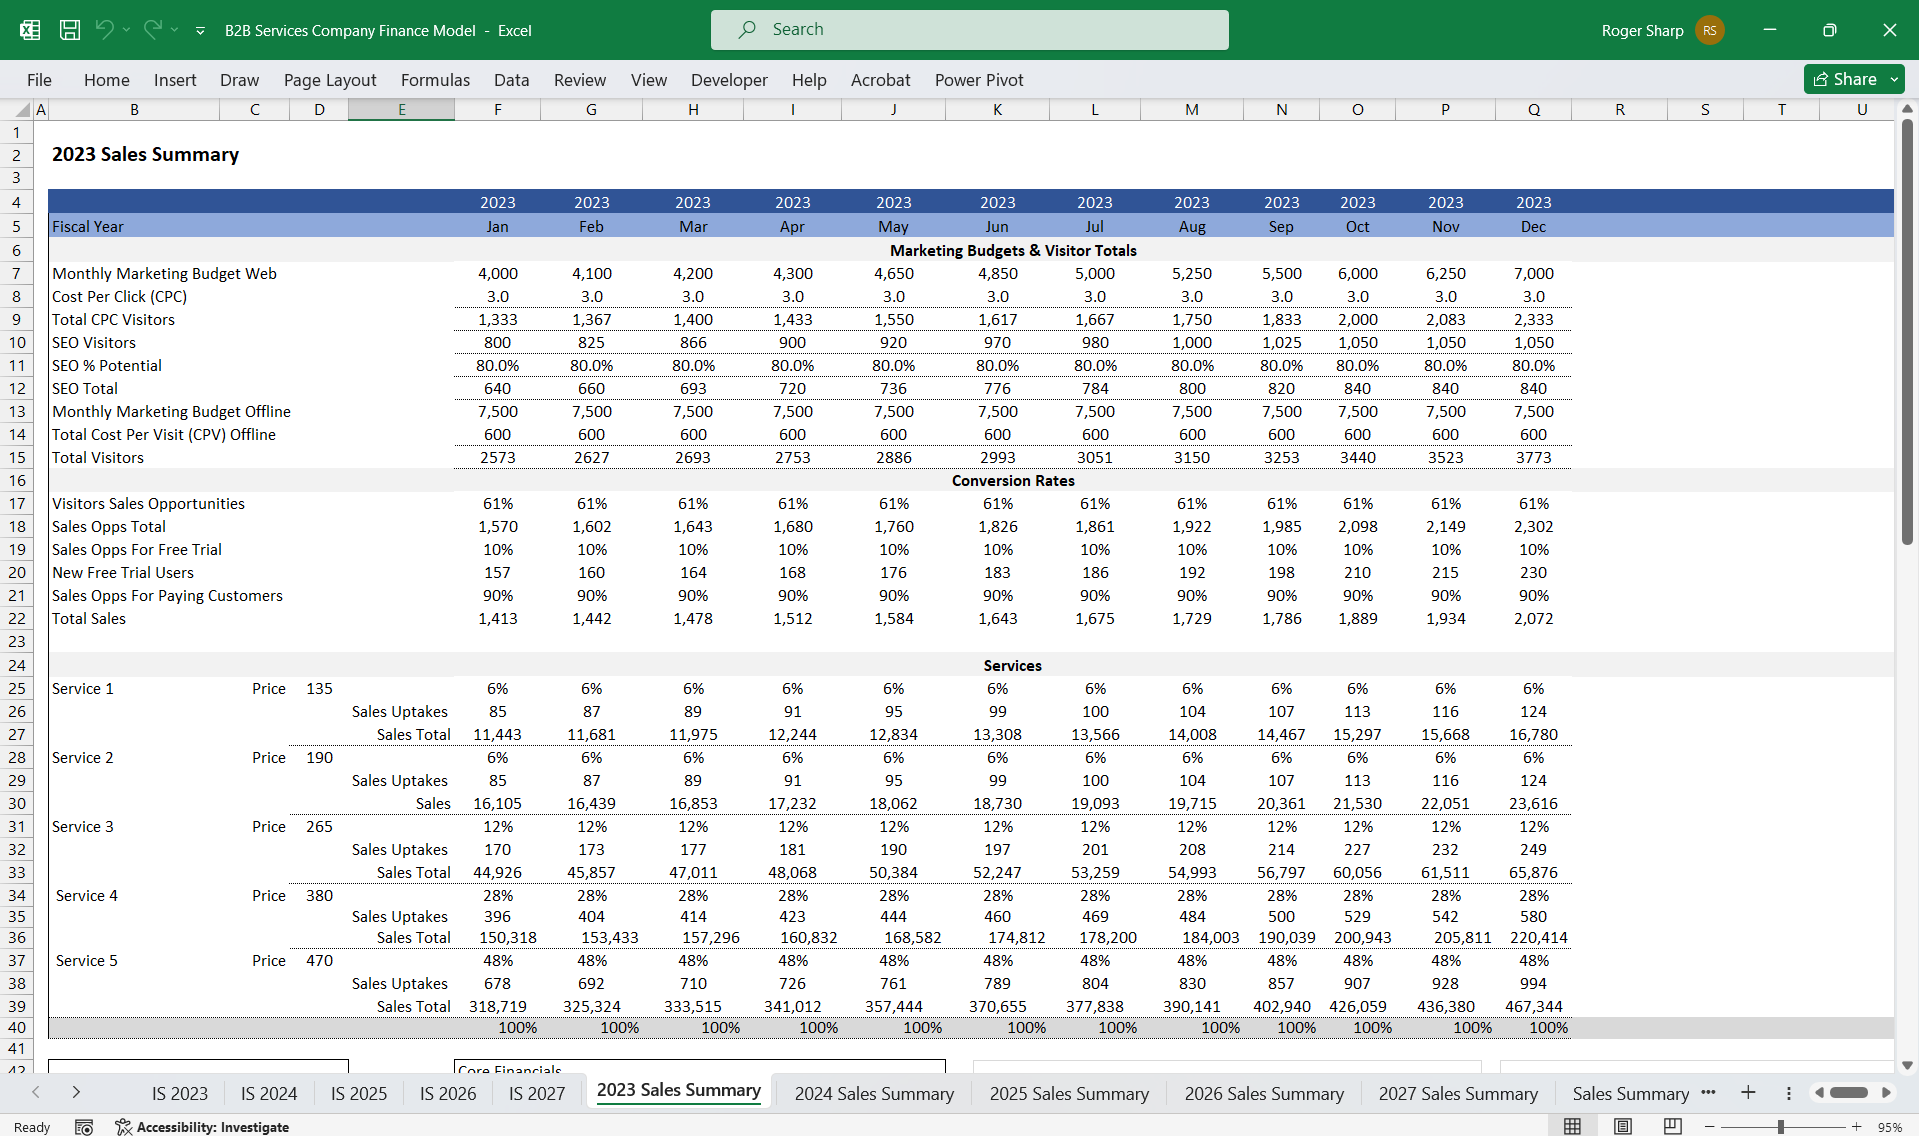 B2B Services Company Finance Model 5 Year 3 Statement (Excel template (XLSX)) Preview Image